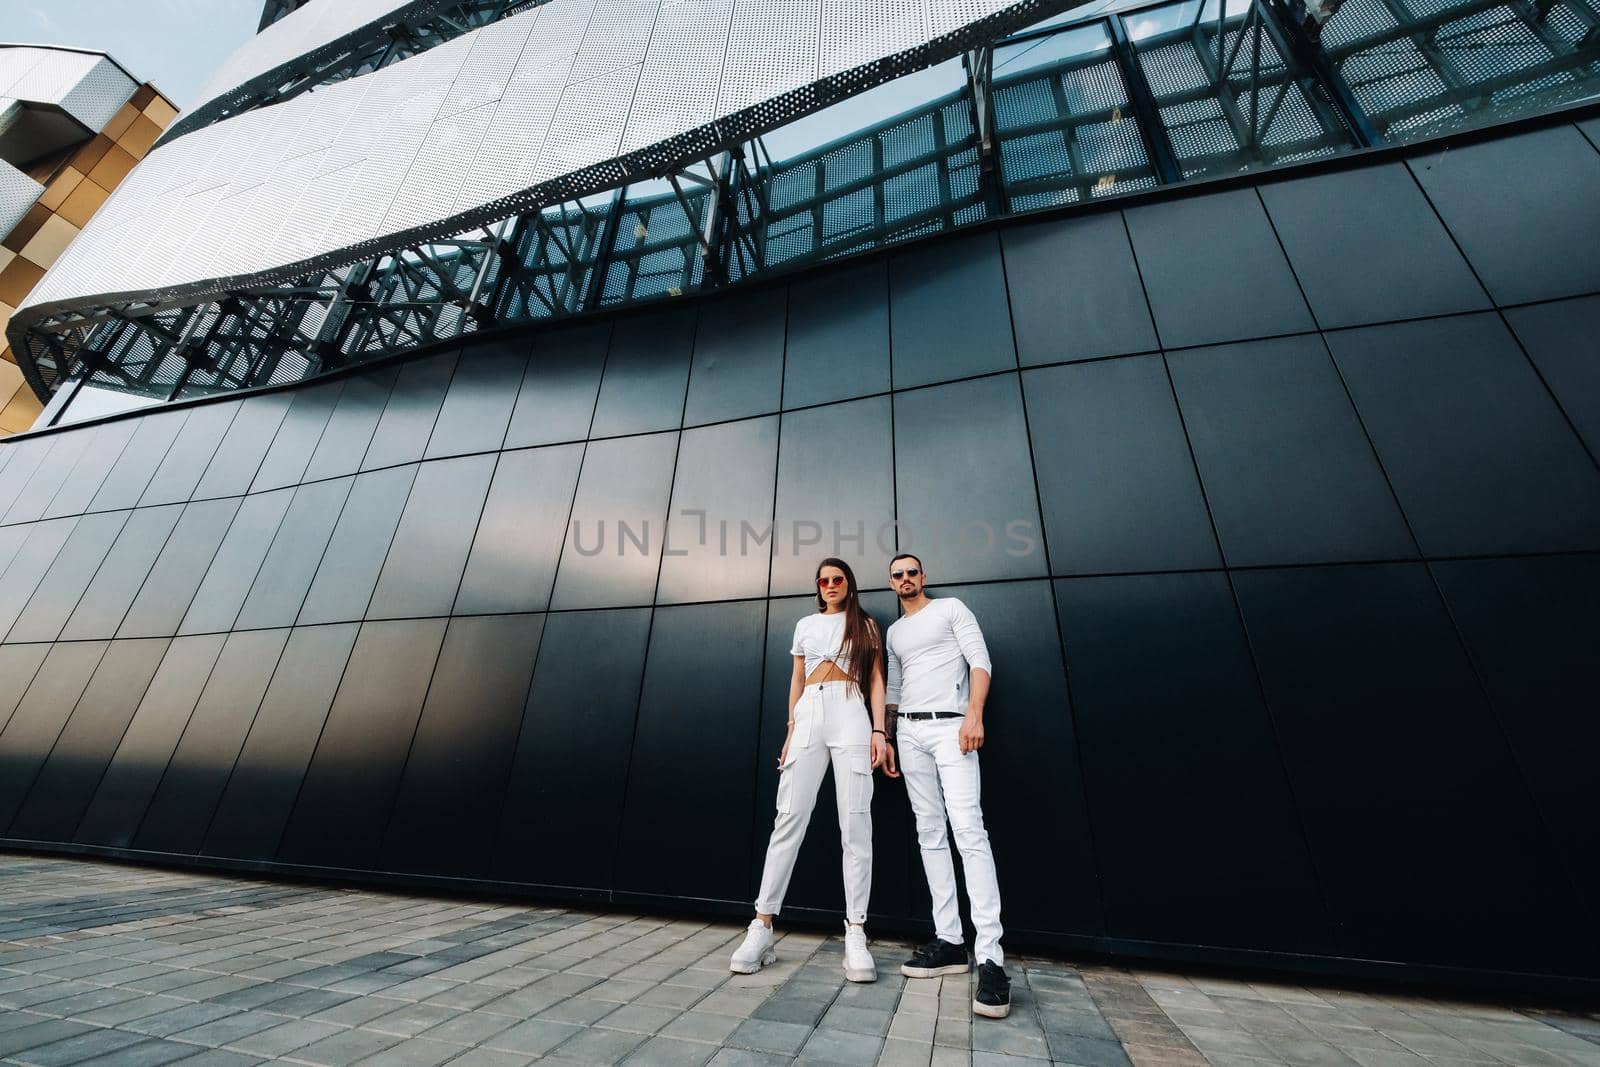 A girl and a guy walk around the city in white clothes and glasses, a couple in love against a black wall